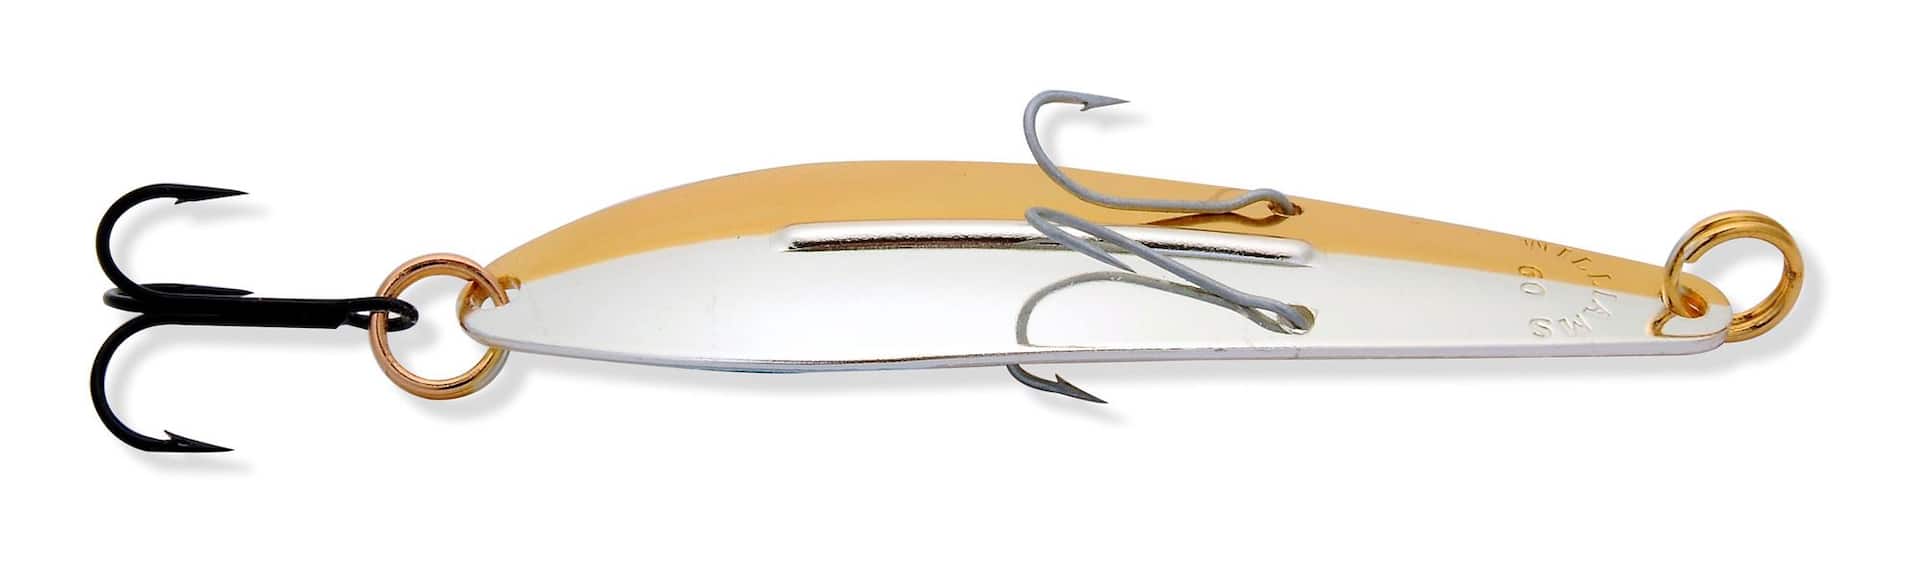 Williams Junior Ice Fishing Jig Lure, Gold/Silver, 1/2-oz